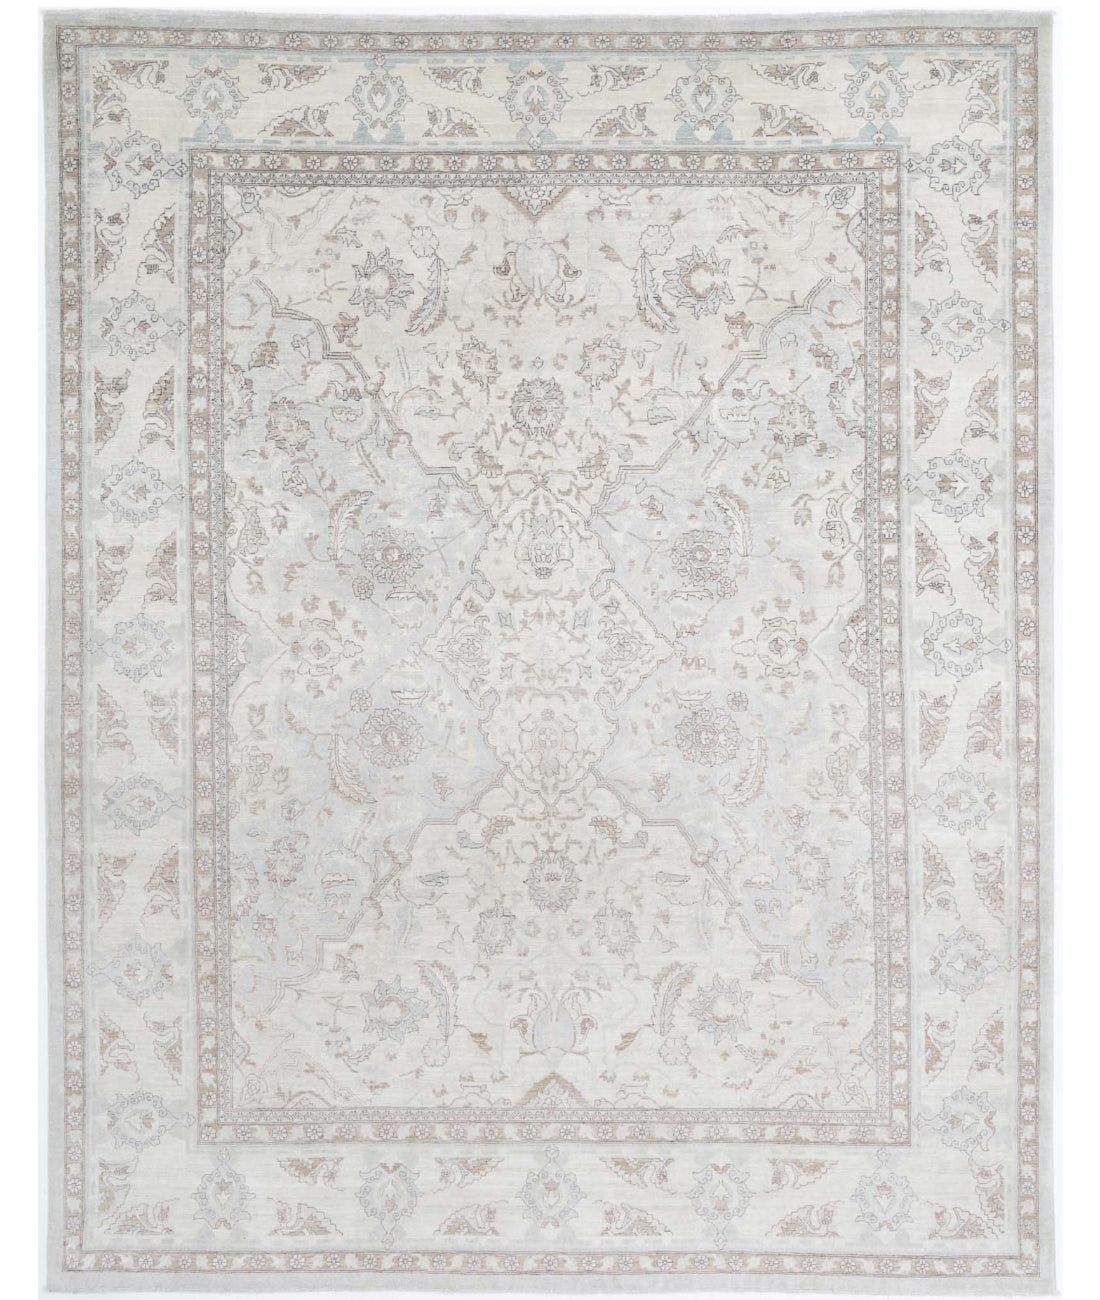 Hand Knotted Fine Ariana Polonaise Wool Rug - 7'11'' x 10'2'' 7'11'' x 10'2'' (238 X 305) / Ivory / Taupe